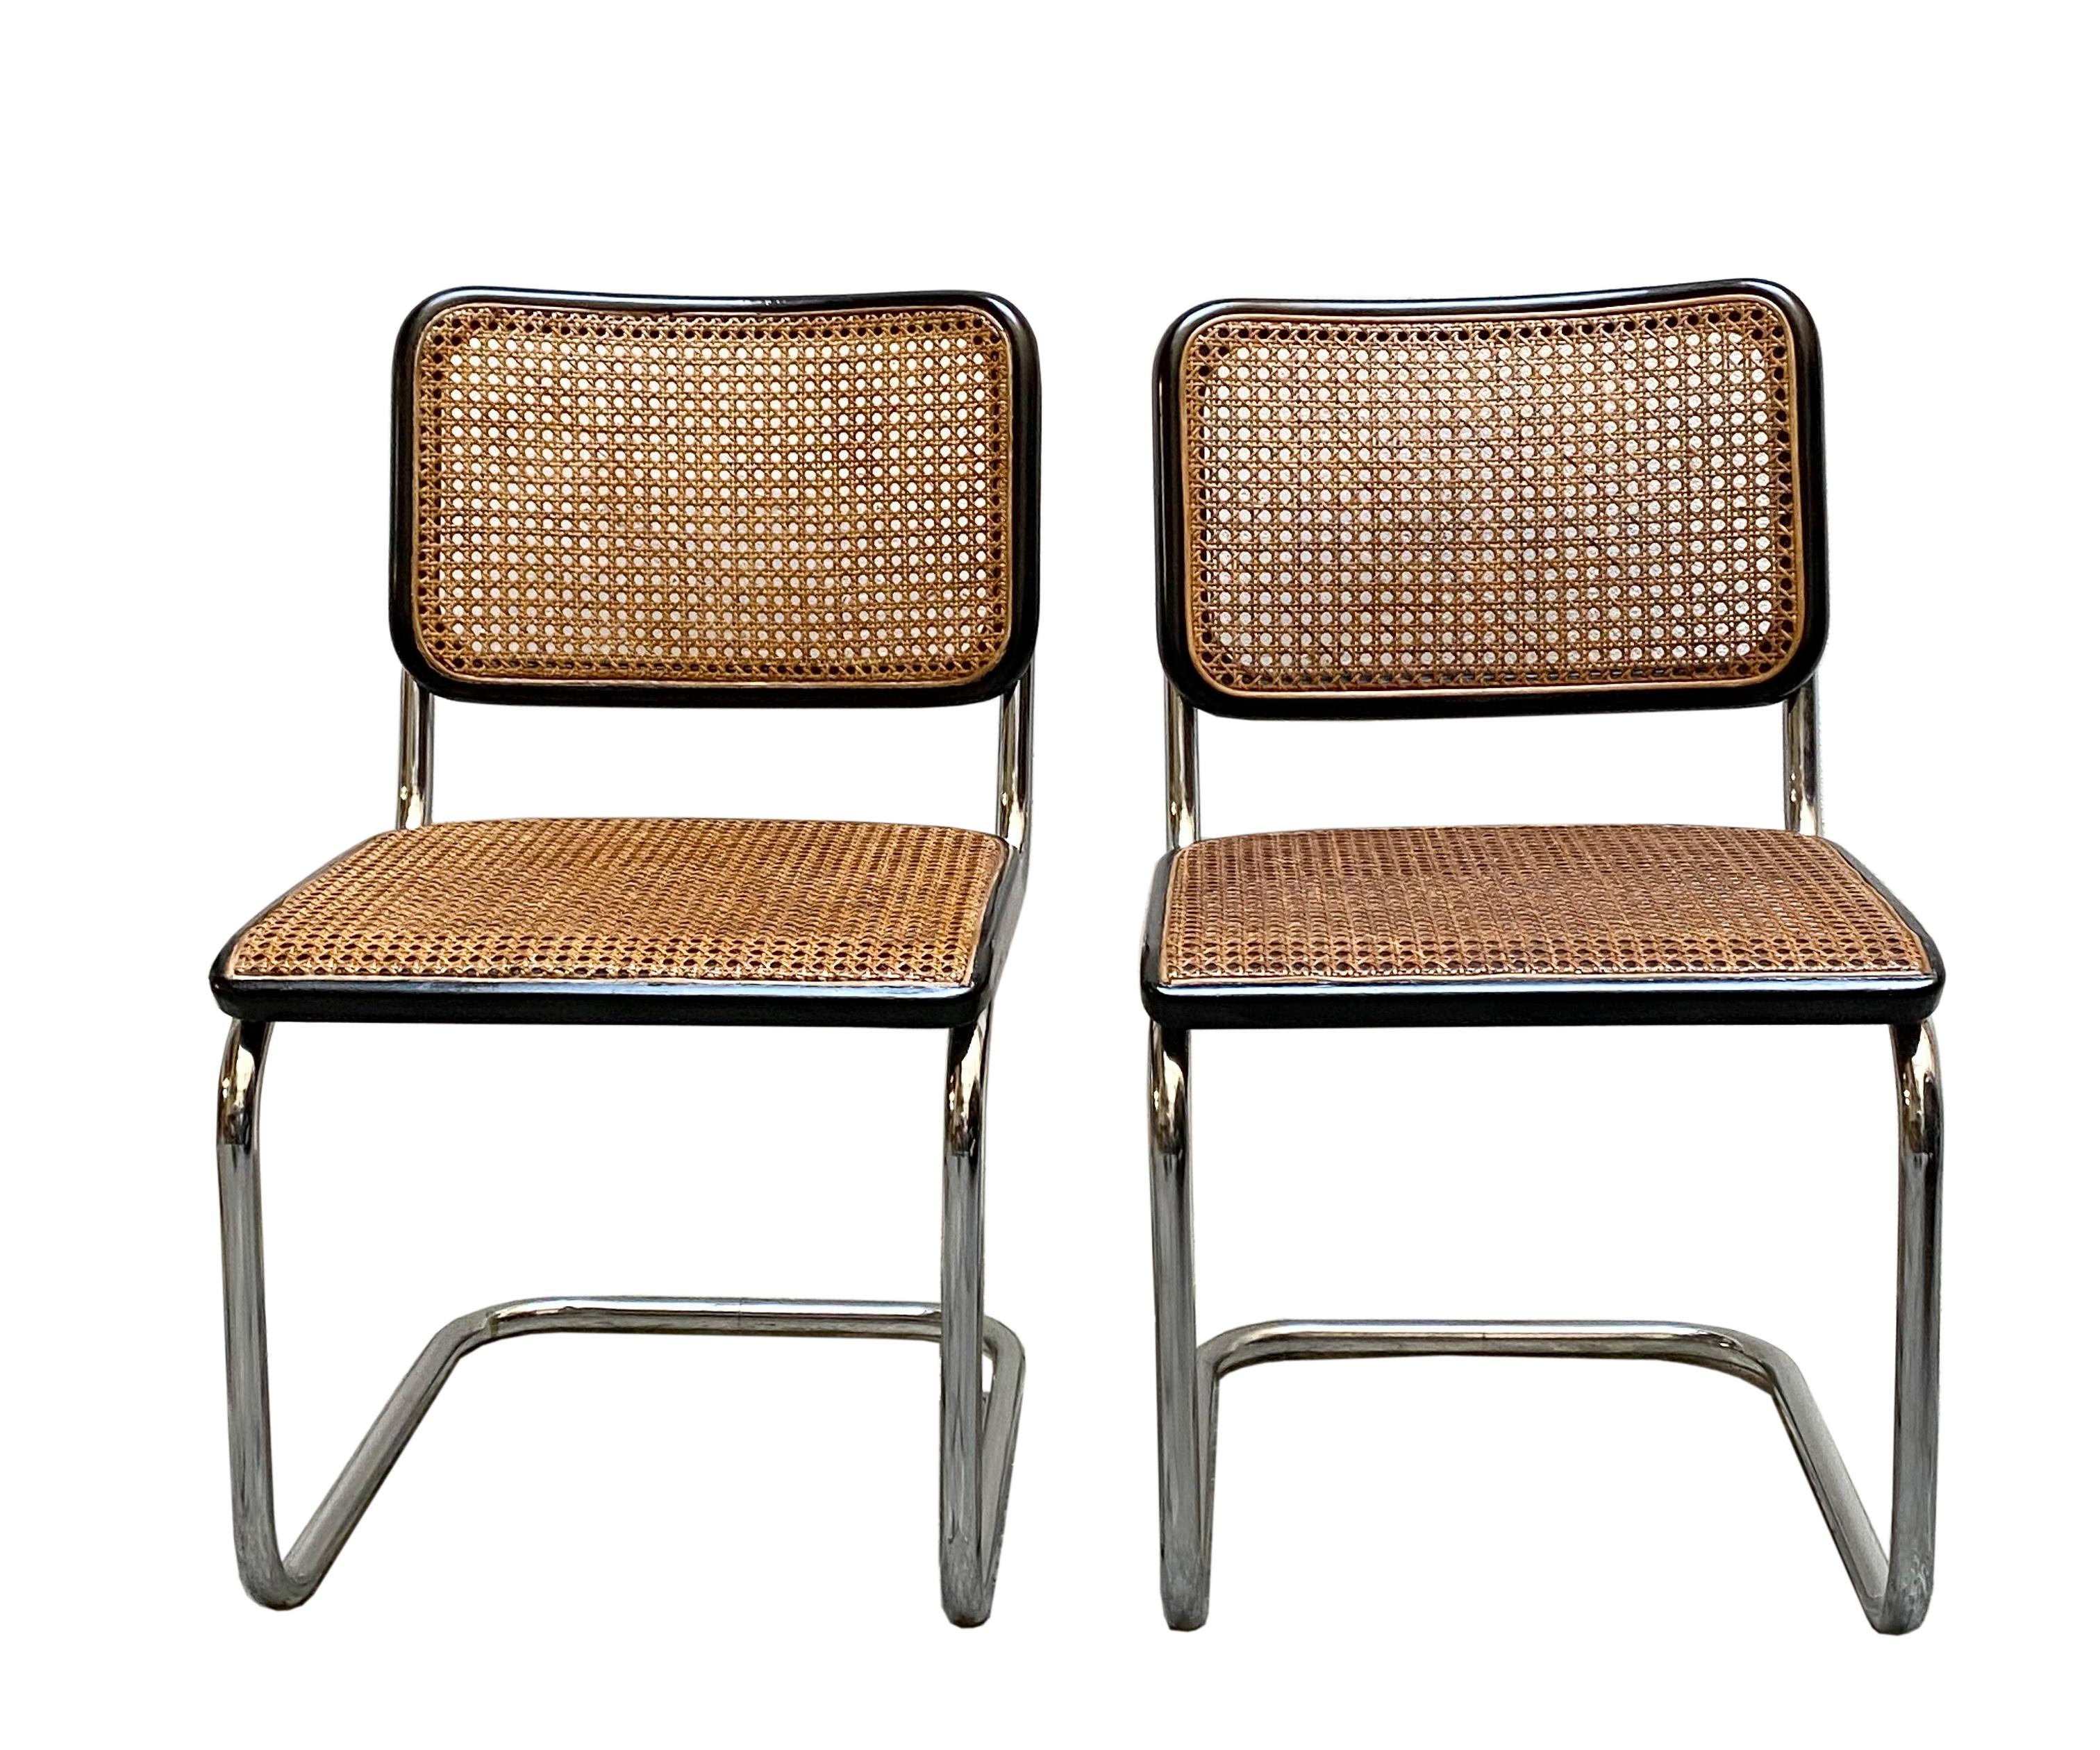 Pair of chairs by Marcel Breuer for Thonet 1950, the supporting structure made of continuous tubular steel, bent to shape the chair and then chromed.
The seat and backrest are made of black lacquered wood and Vienna straw.